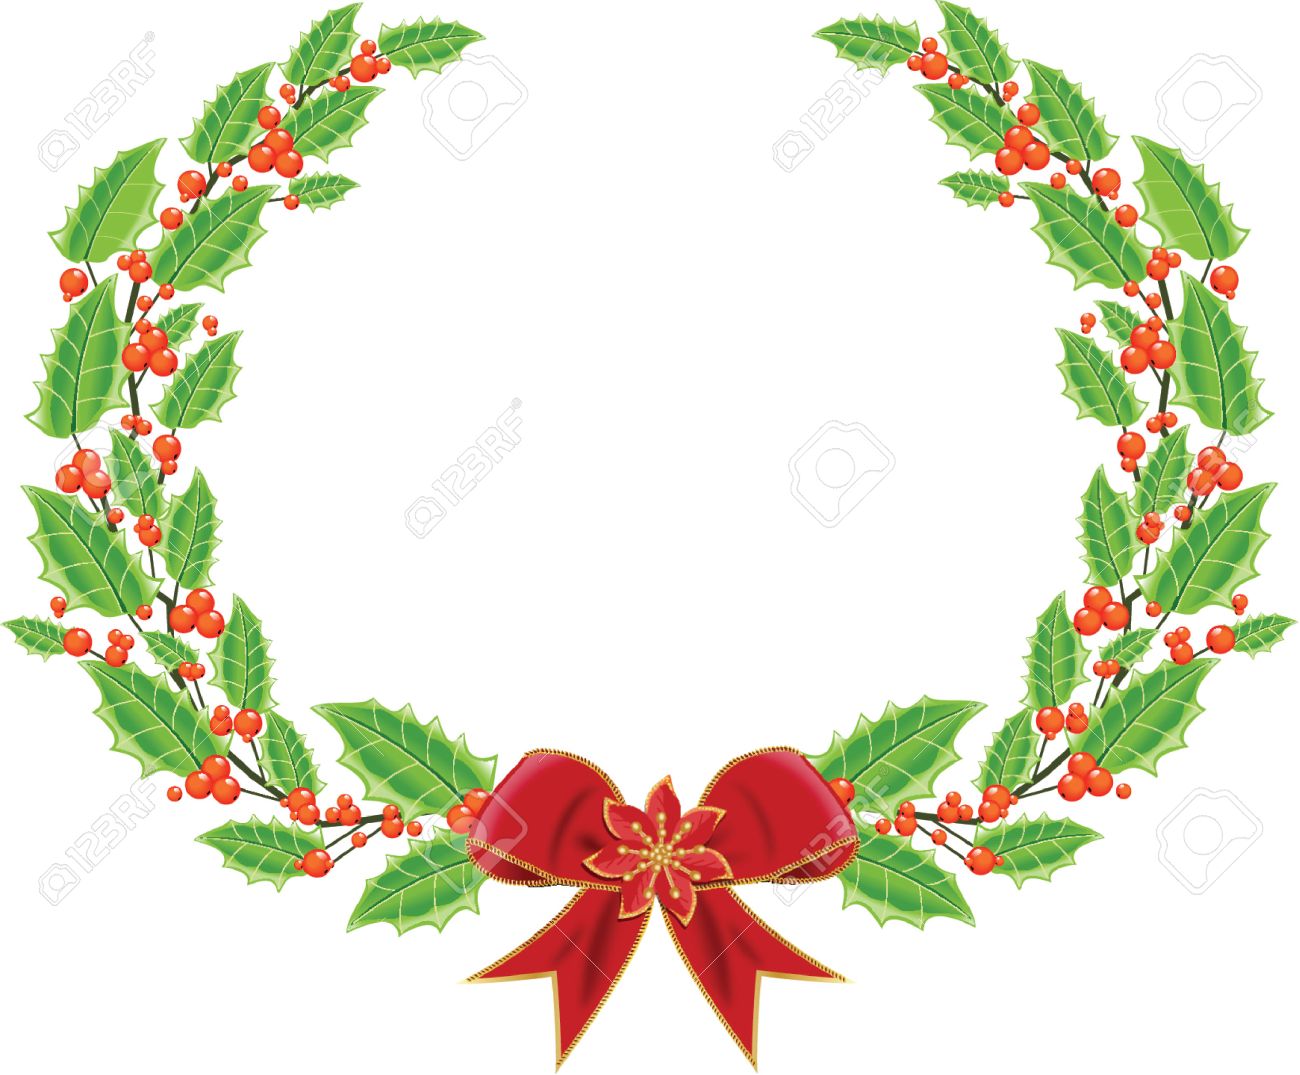 Holly Wreath Clipart Free.